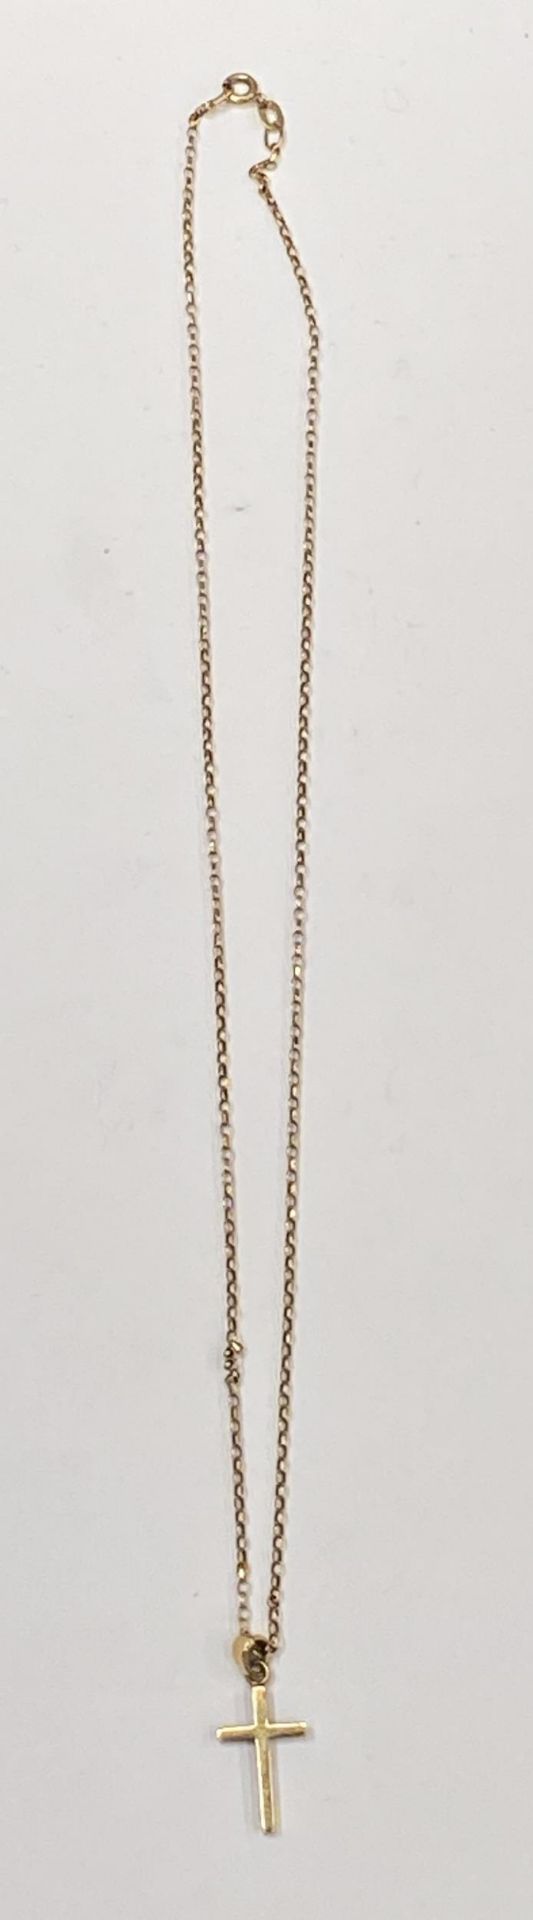 A 9CT YELLOW GOLD NECKLACE WITH CROSS PENDANT, TOTAL WEIGHT 2.96G